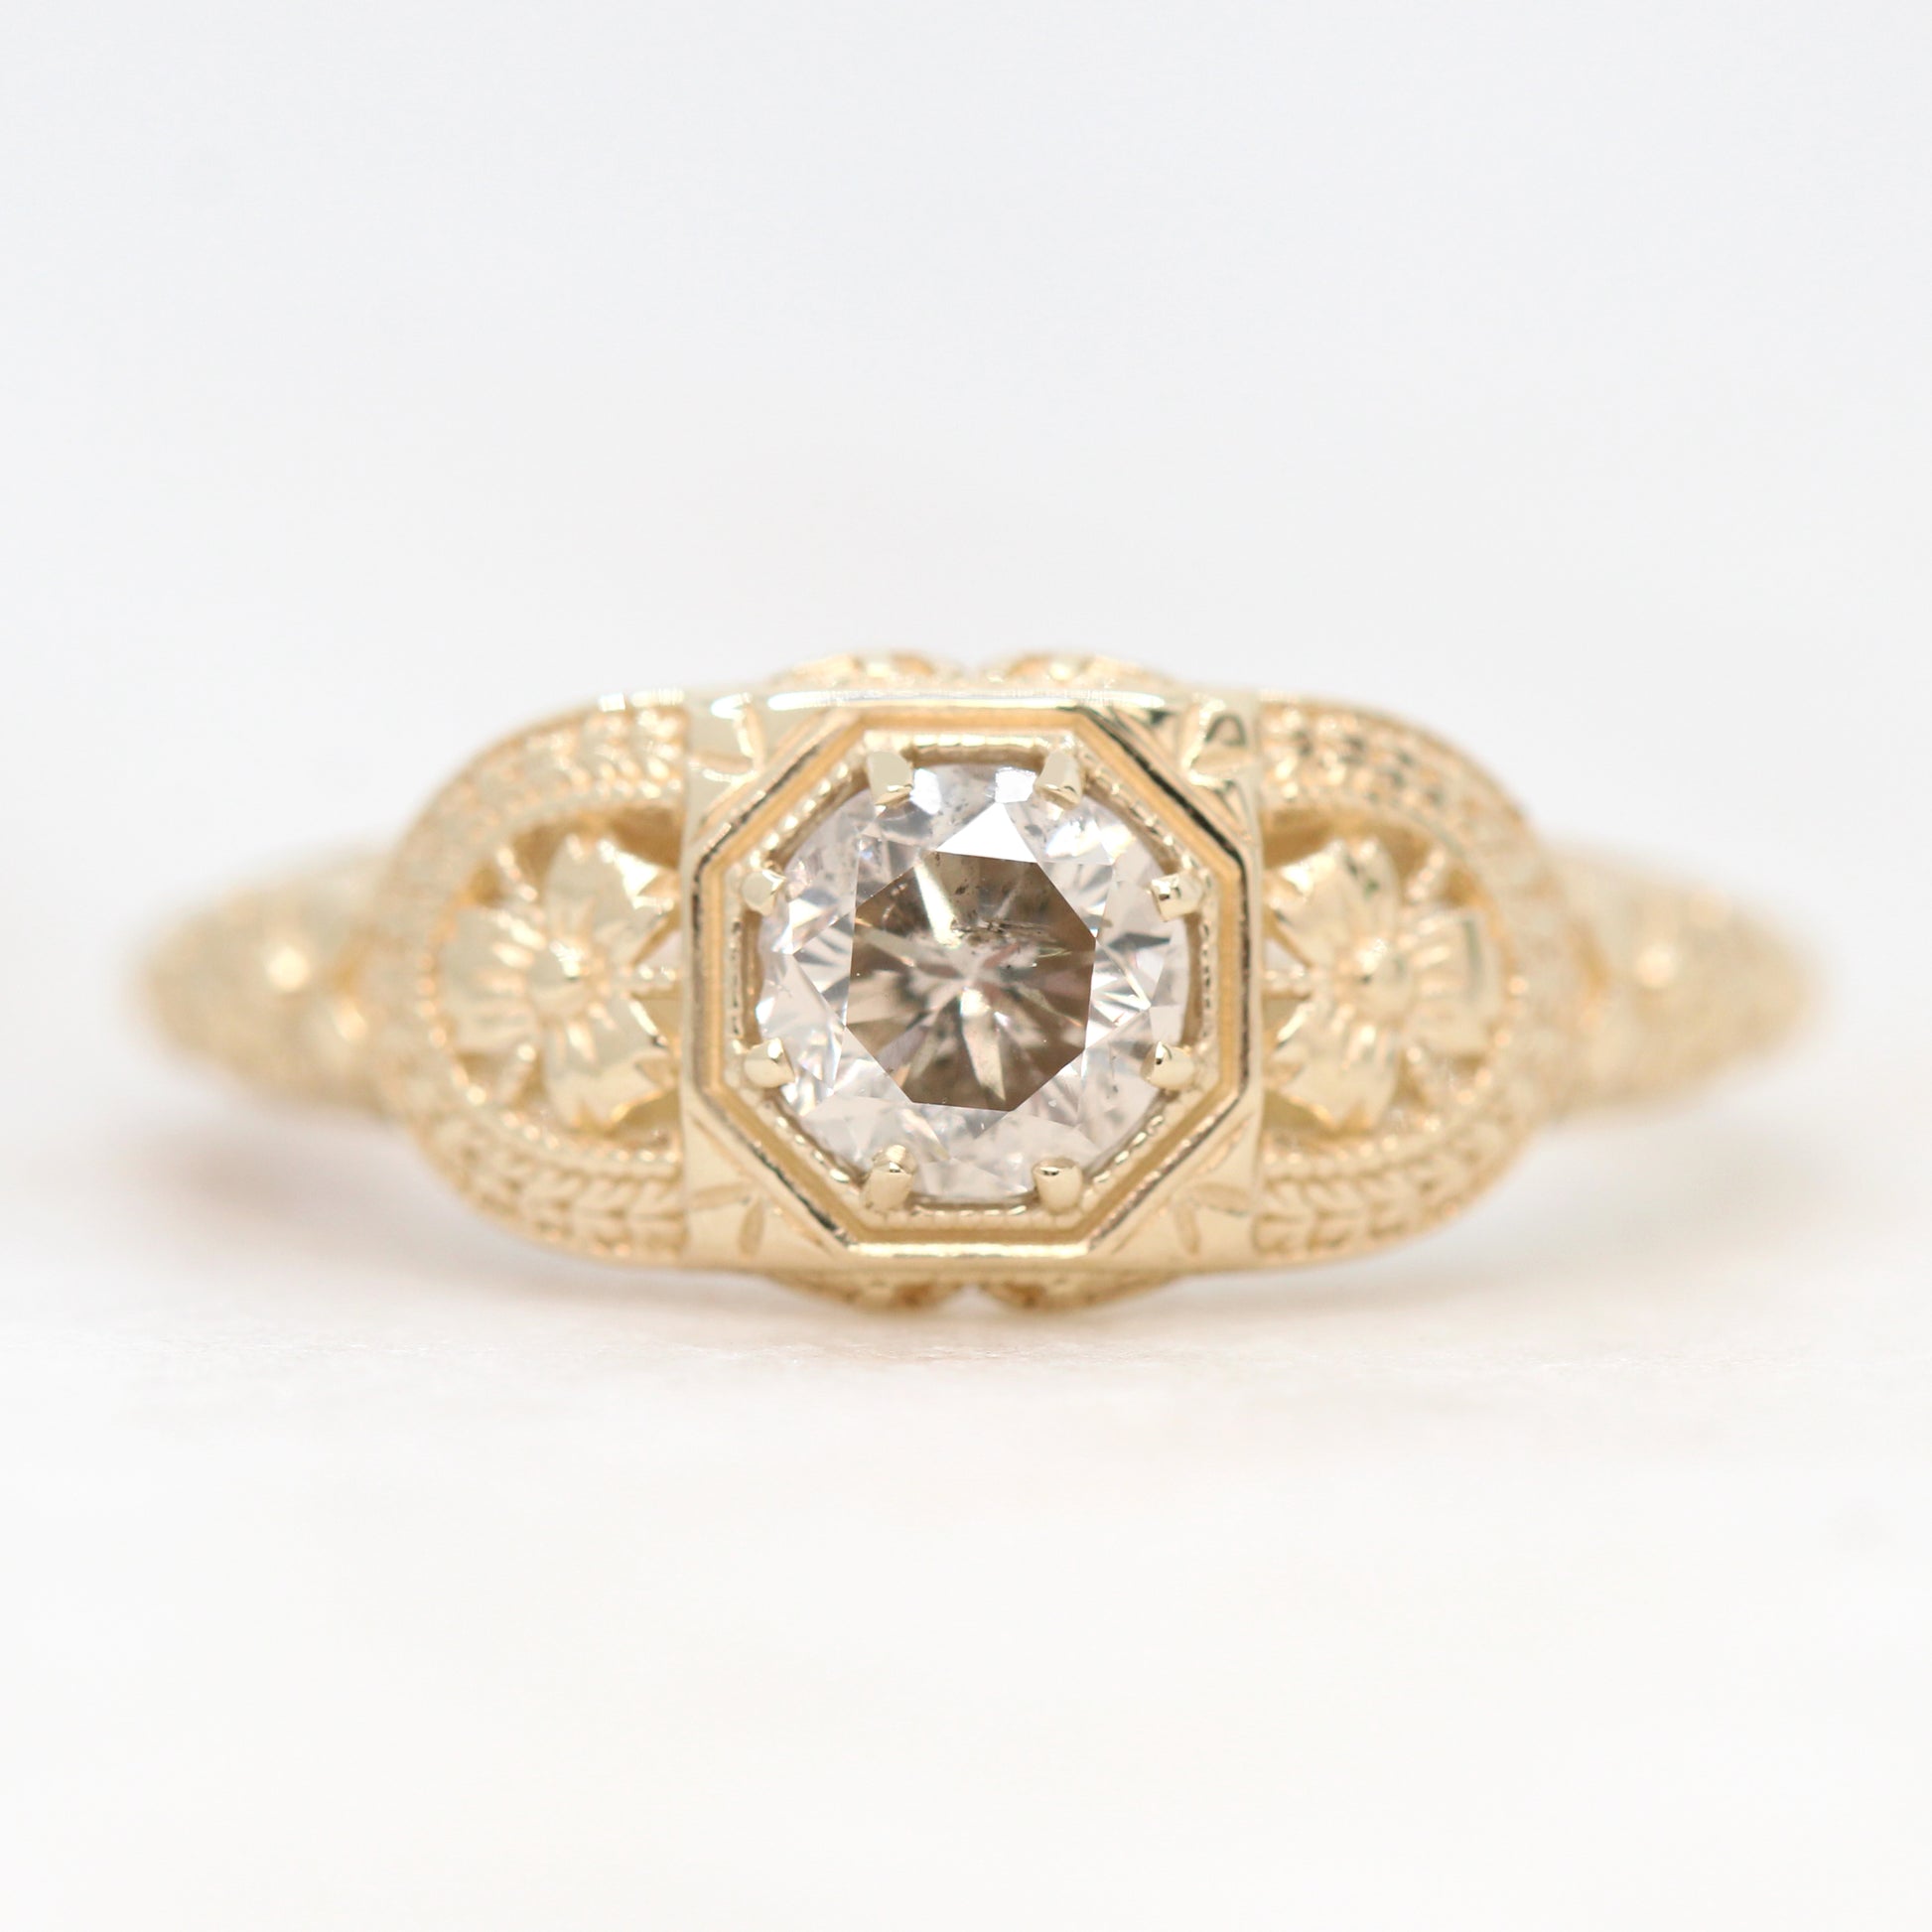 Delphine Ring with a 0.54 Carat Round Gray Celestial Diamond in 14k Yellow Gold - Ready to Size and Ship - Midwinter Co. Alternative Bridal Rings and Modern Fine Jewelry